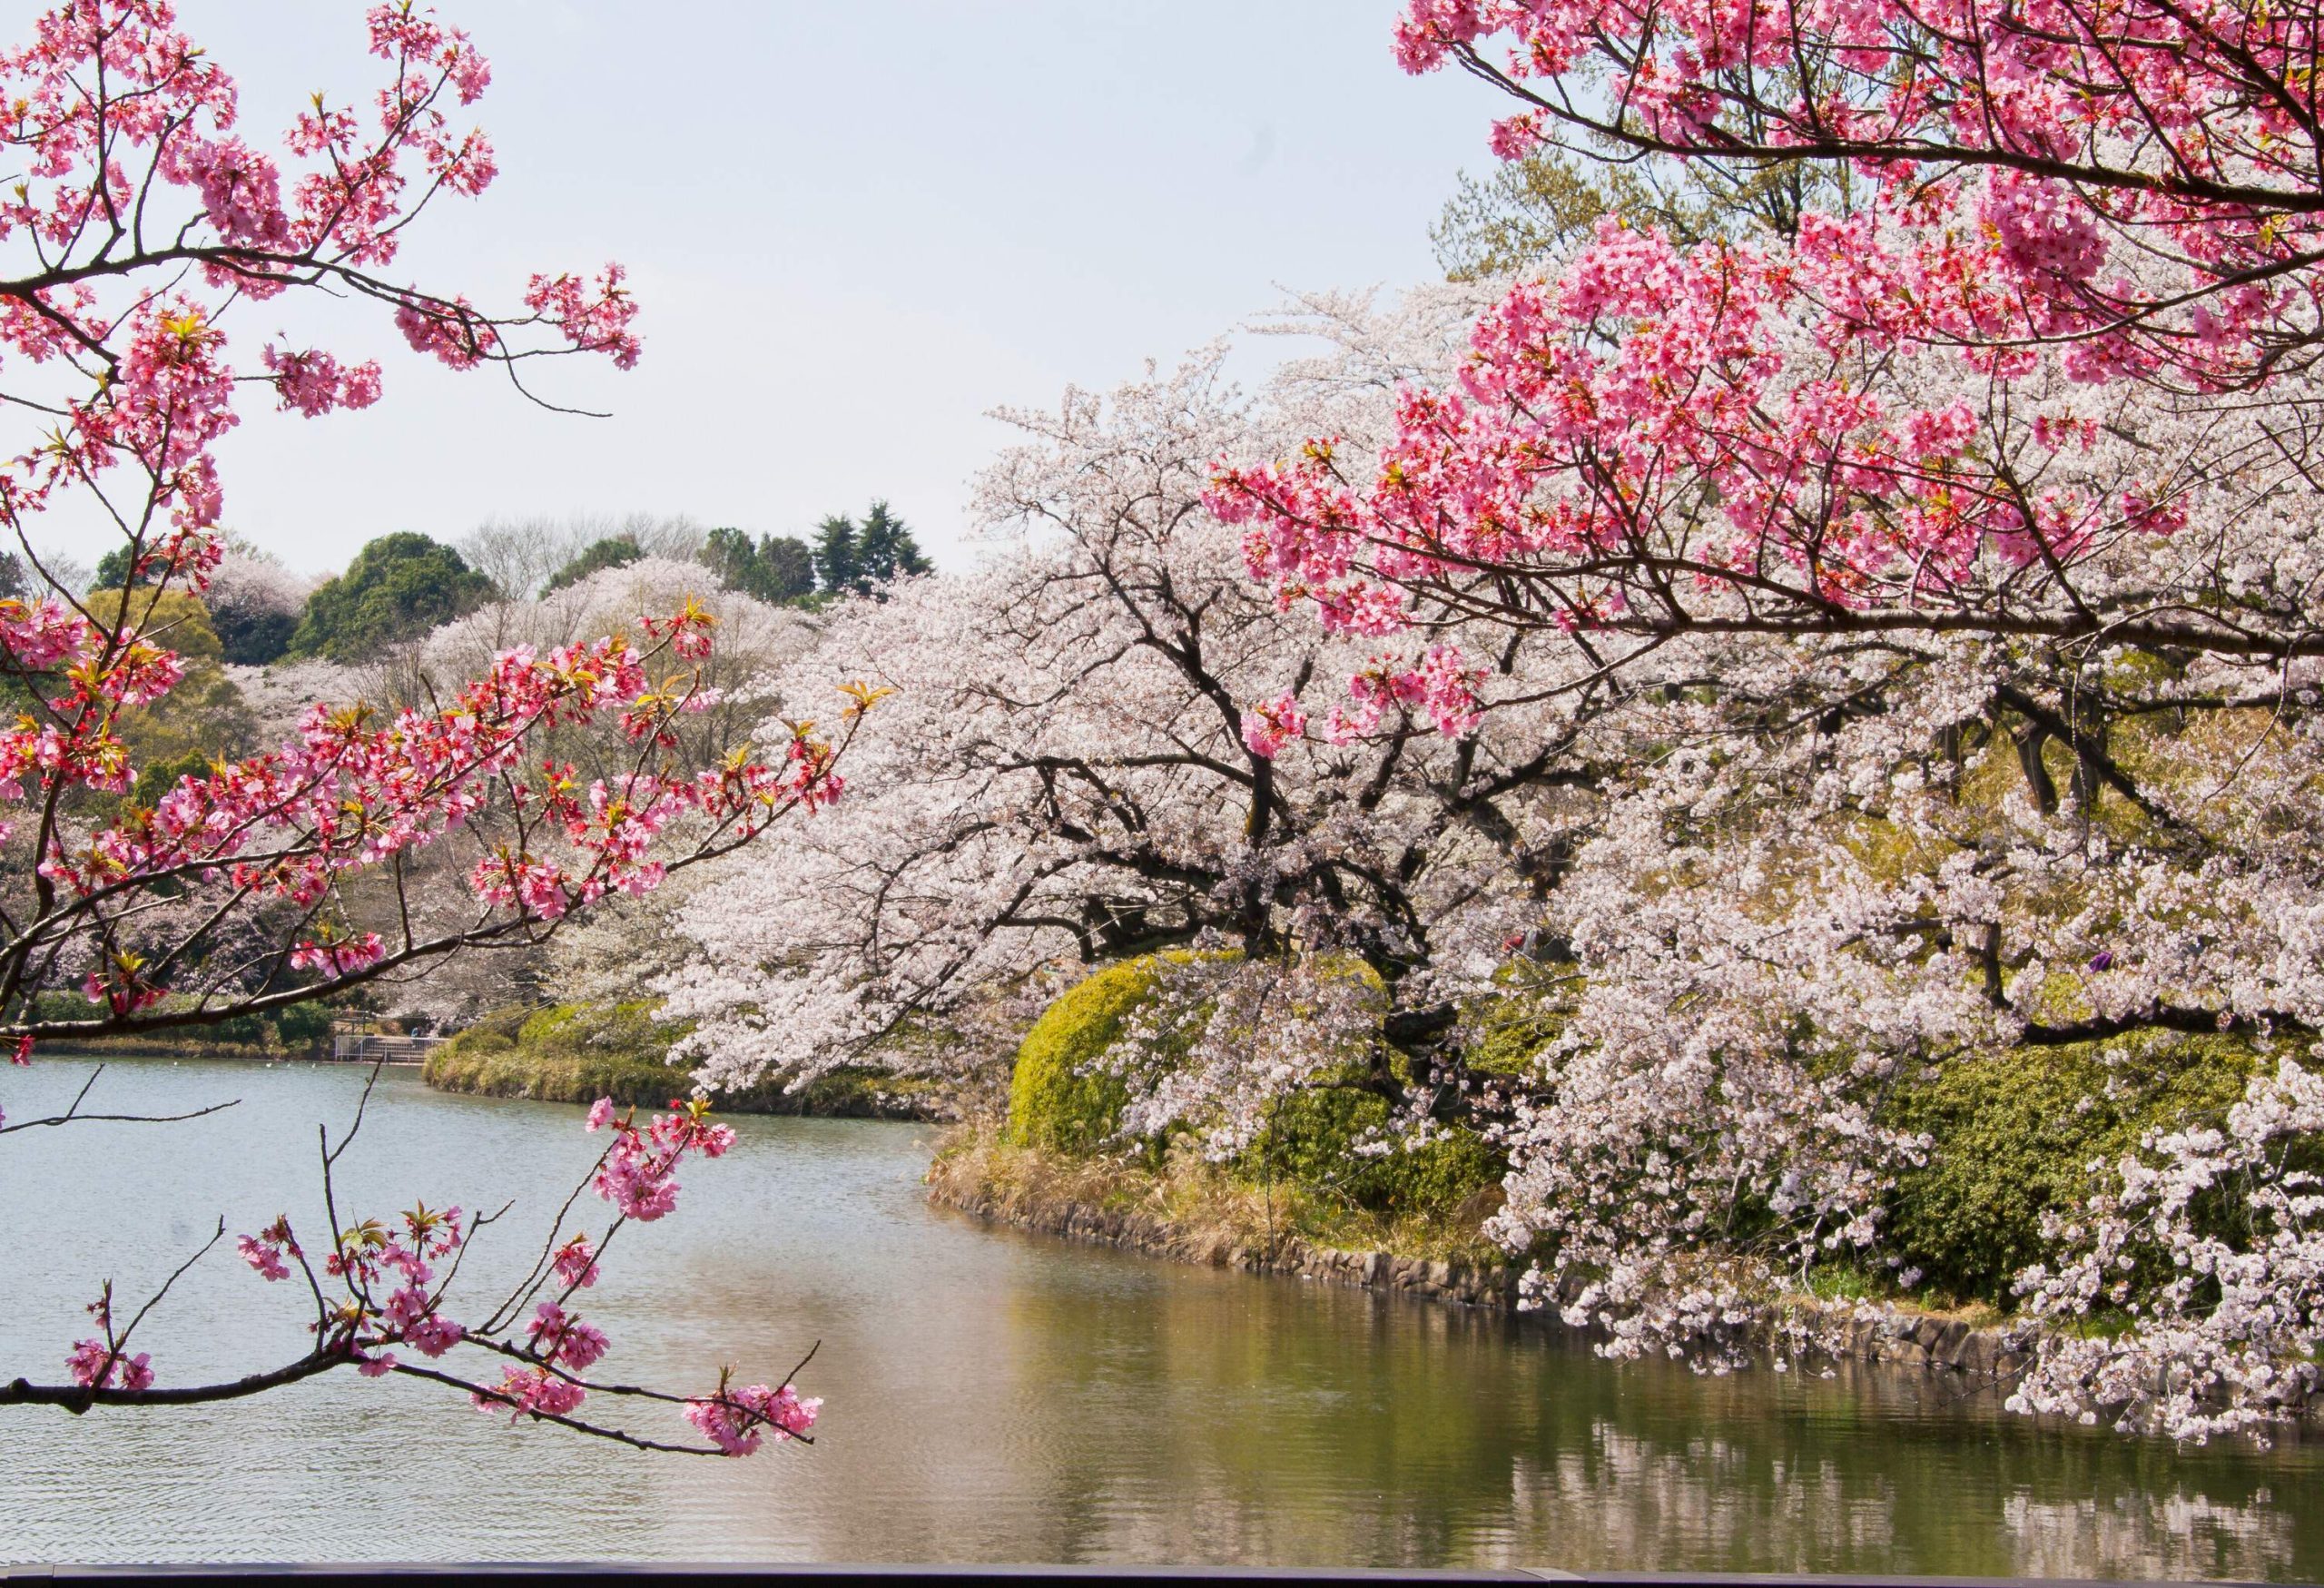 A calm lake in a park surrounded by lush white and pink cherry blossom trees.